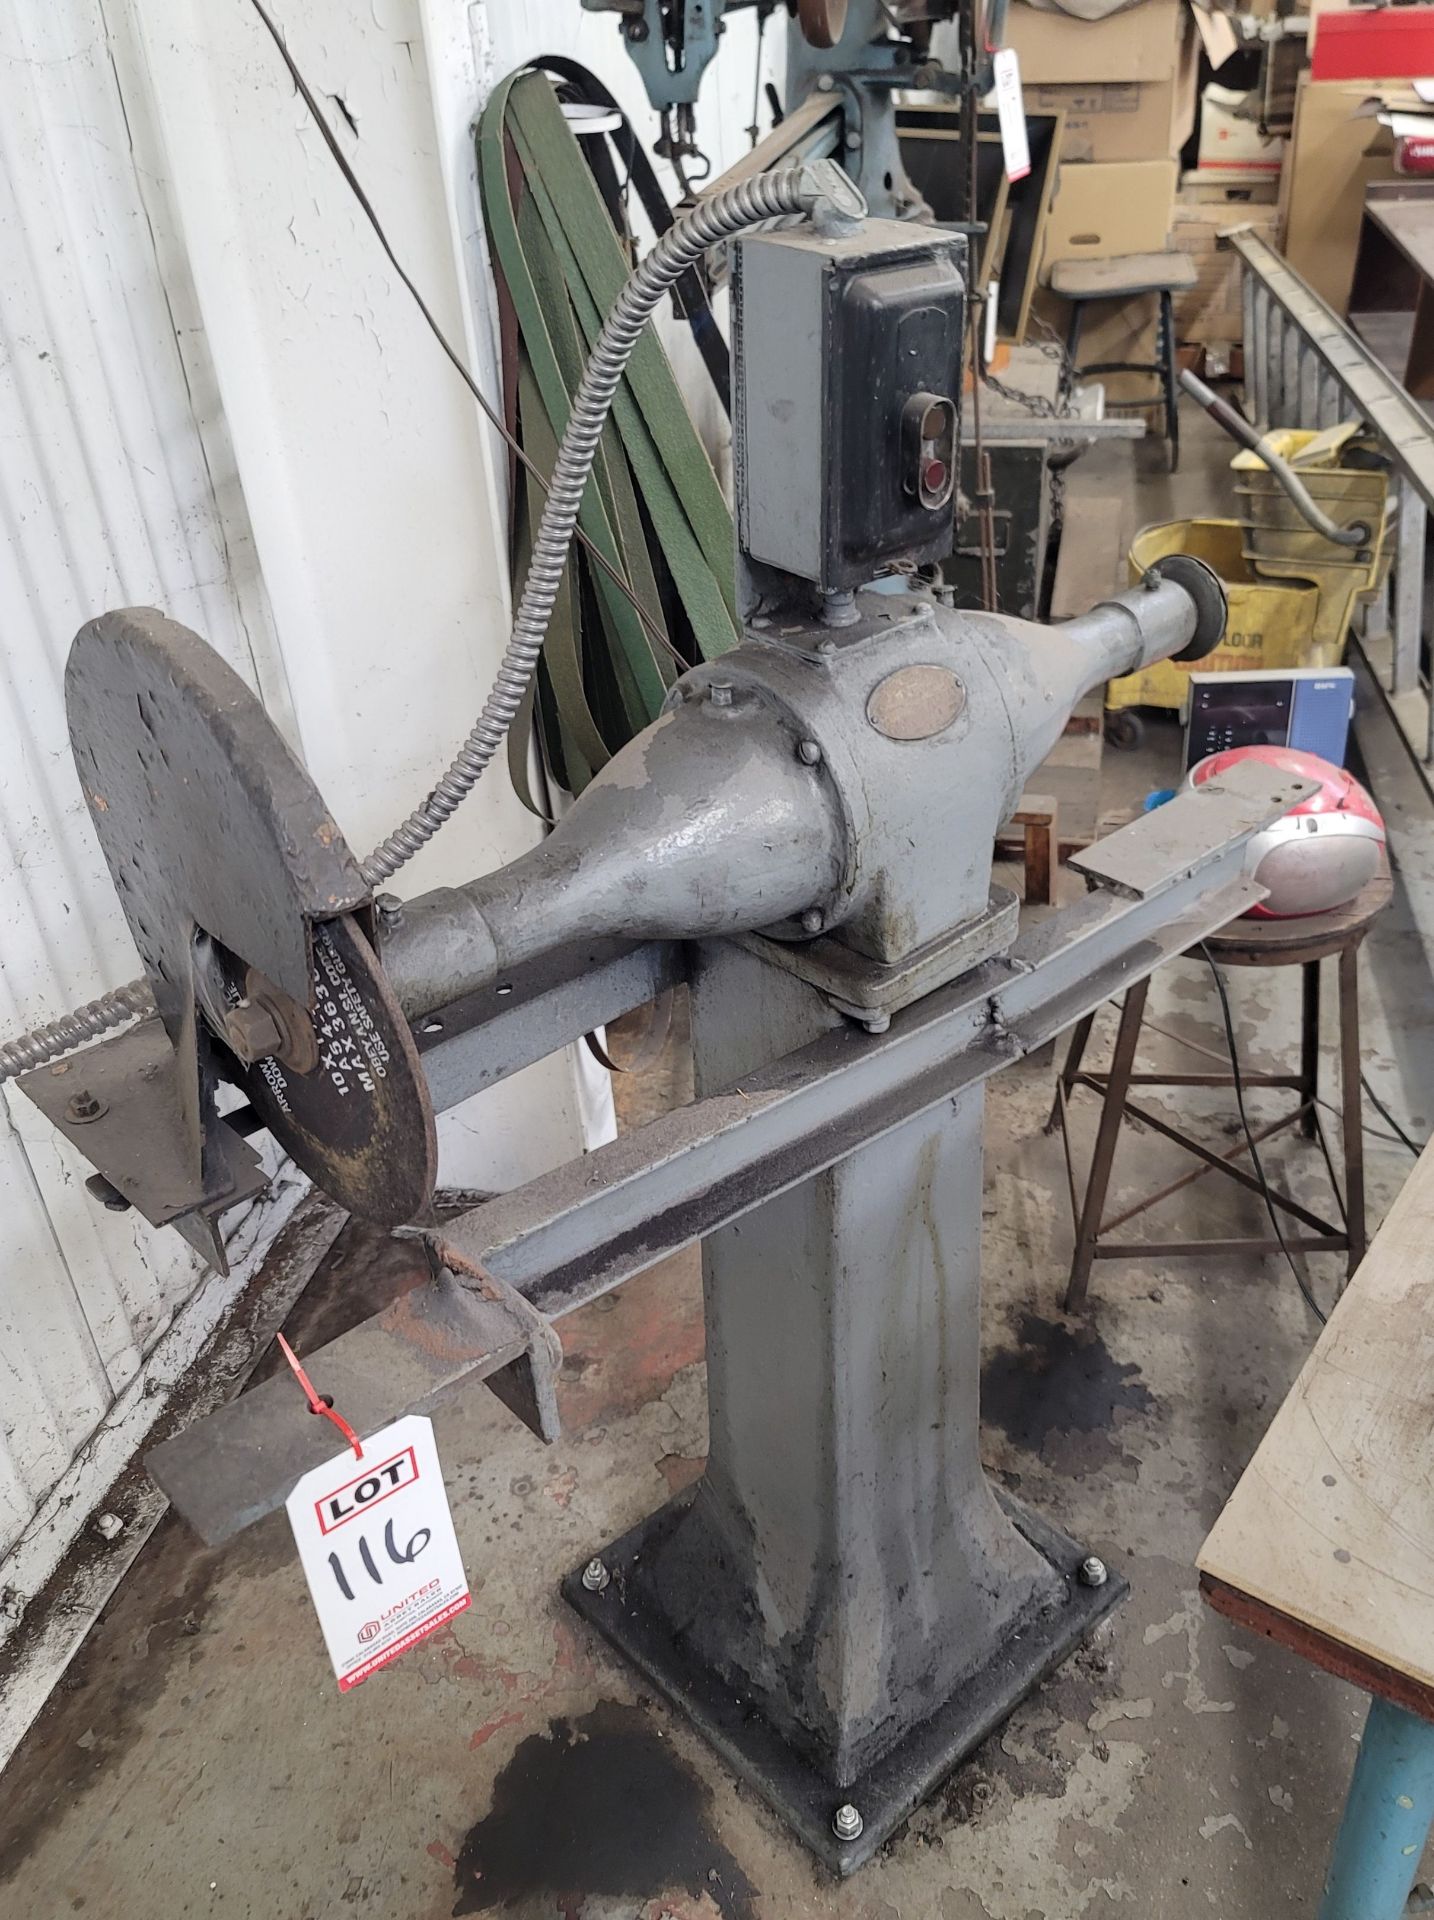 U.S. ELECTRICAL TOOL CO. DOUBLE END GRINDER, MODEL 3460